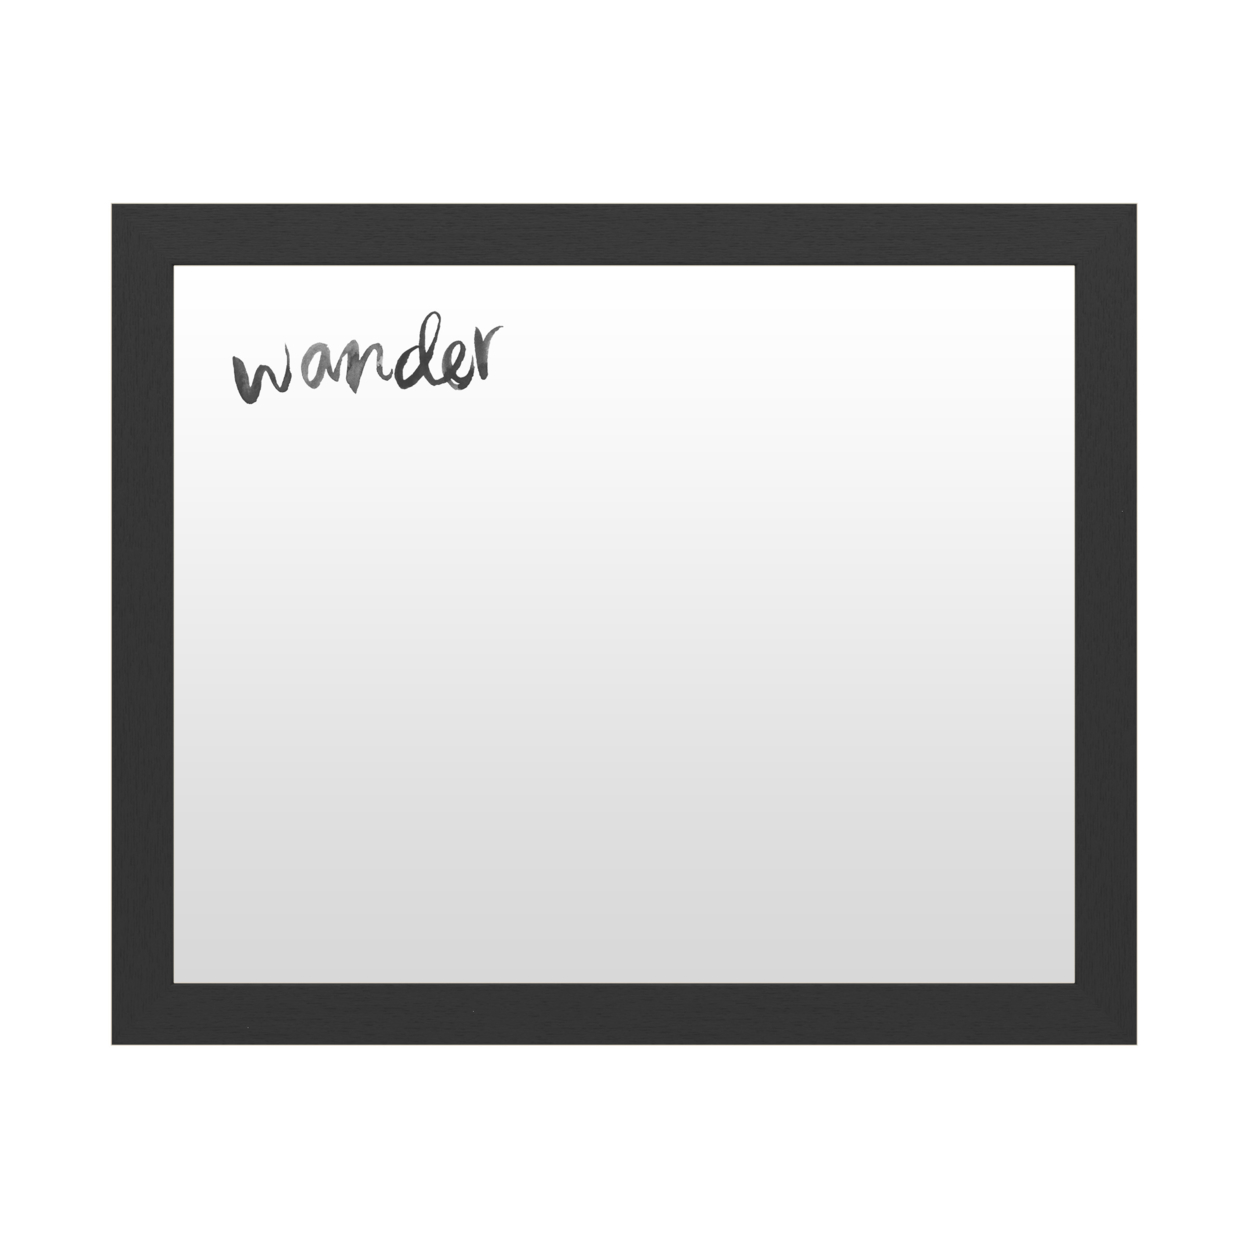 Dry Erase 16 X 20 Marker Board With Printed Artwork - Jennifer Paxton Parker Posi-vibe II White Board - Ready To Hang